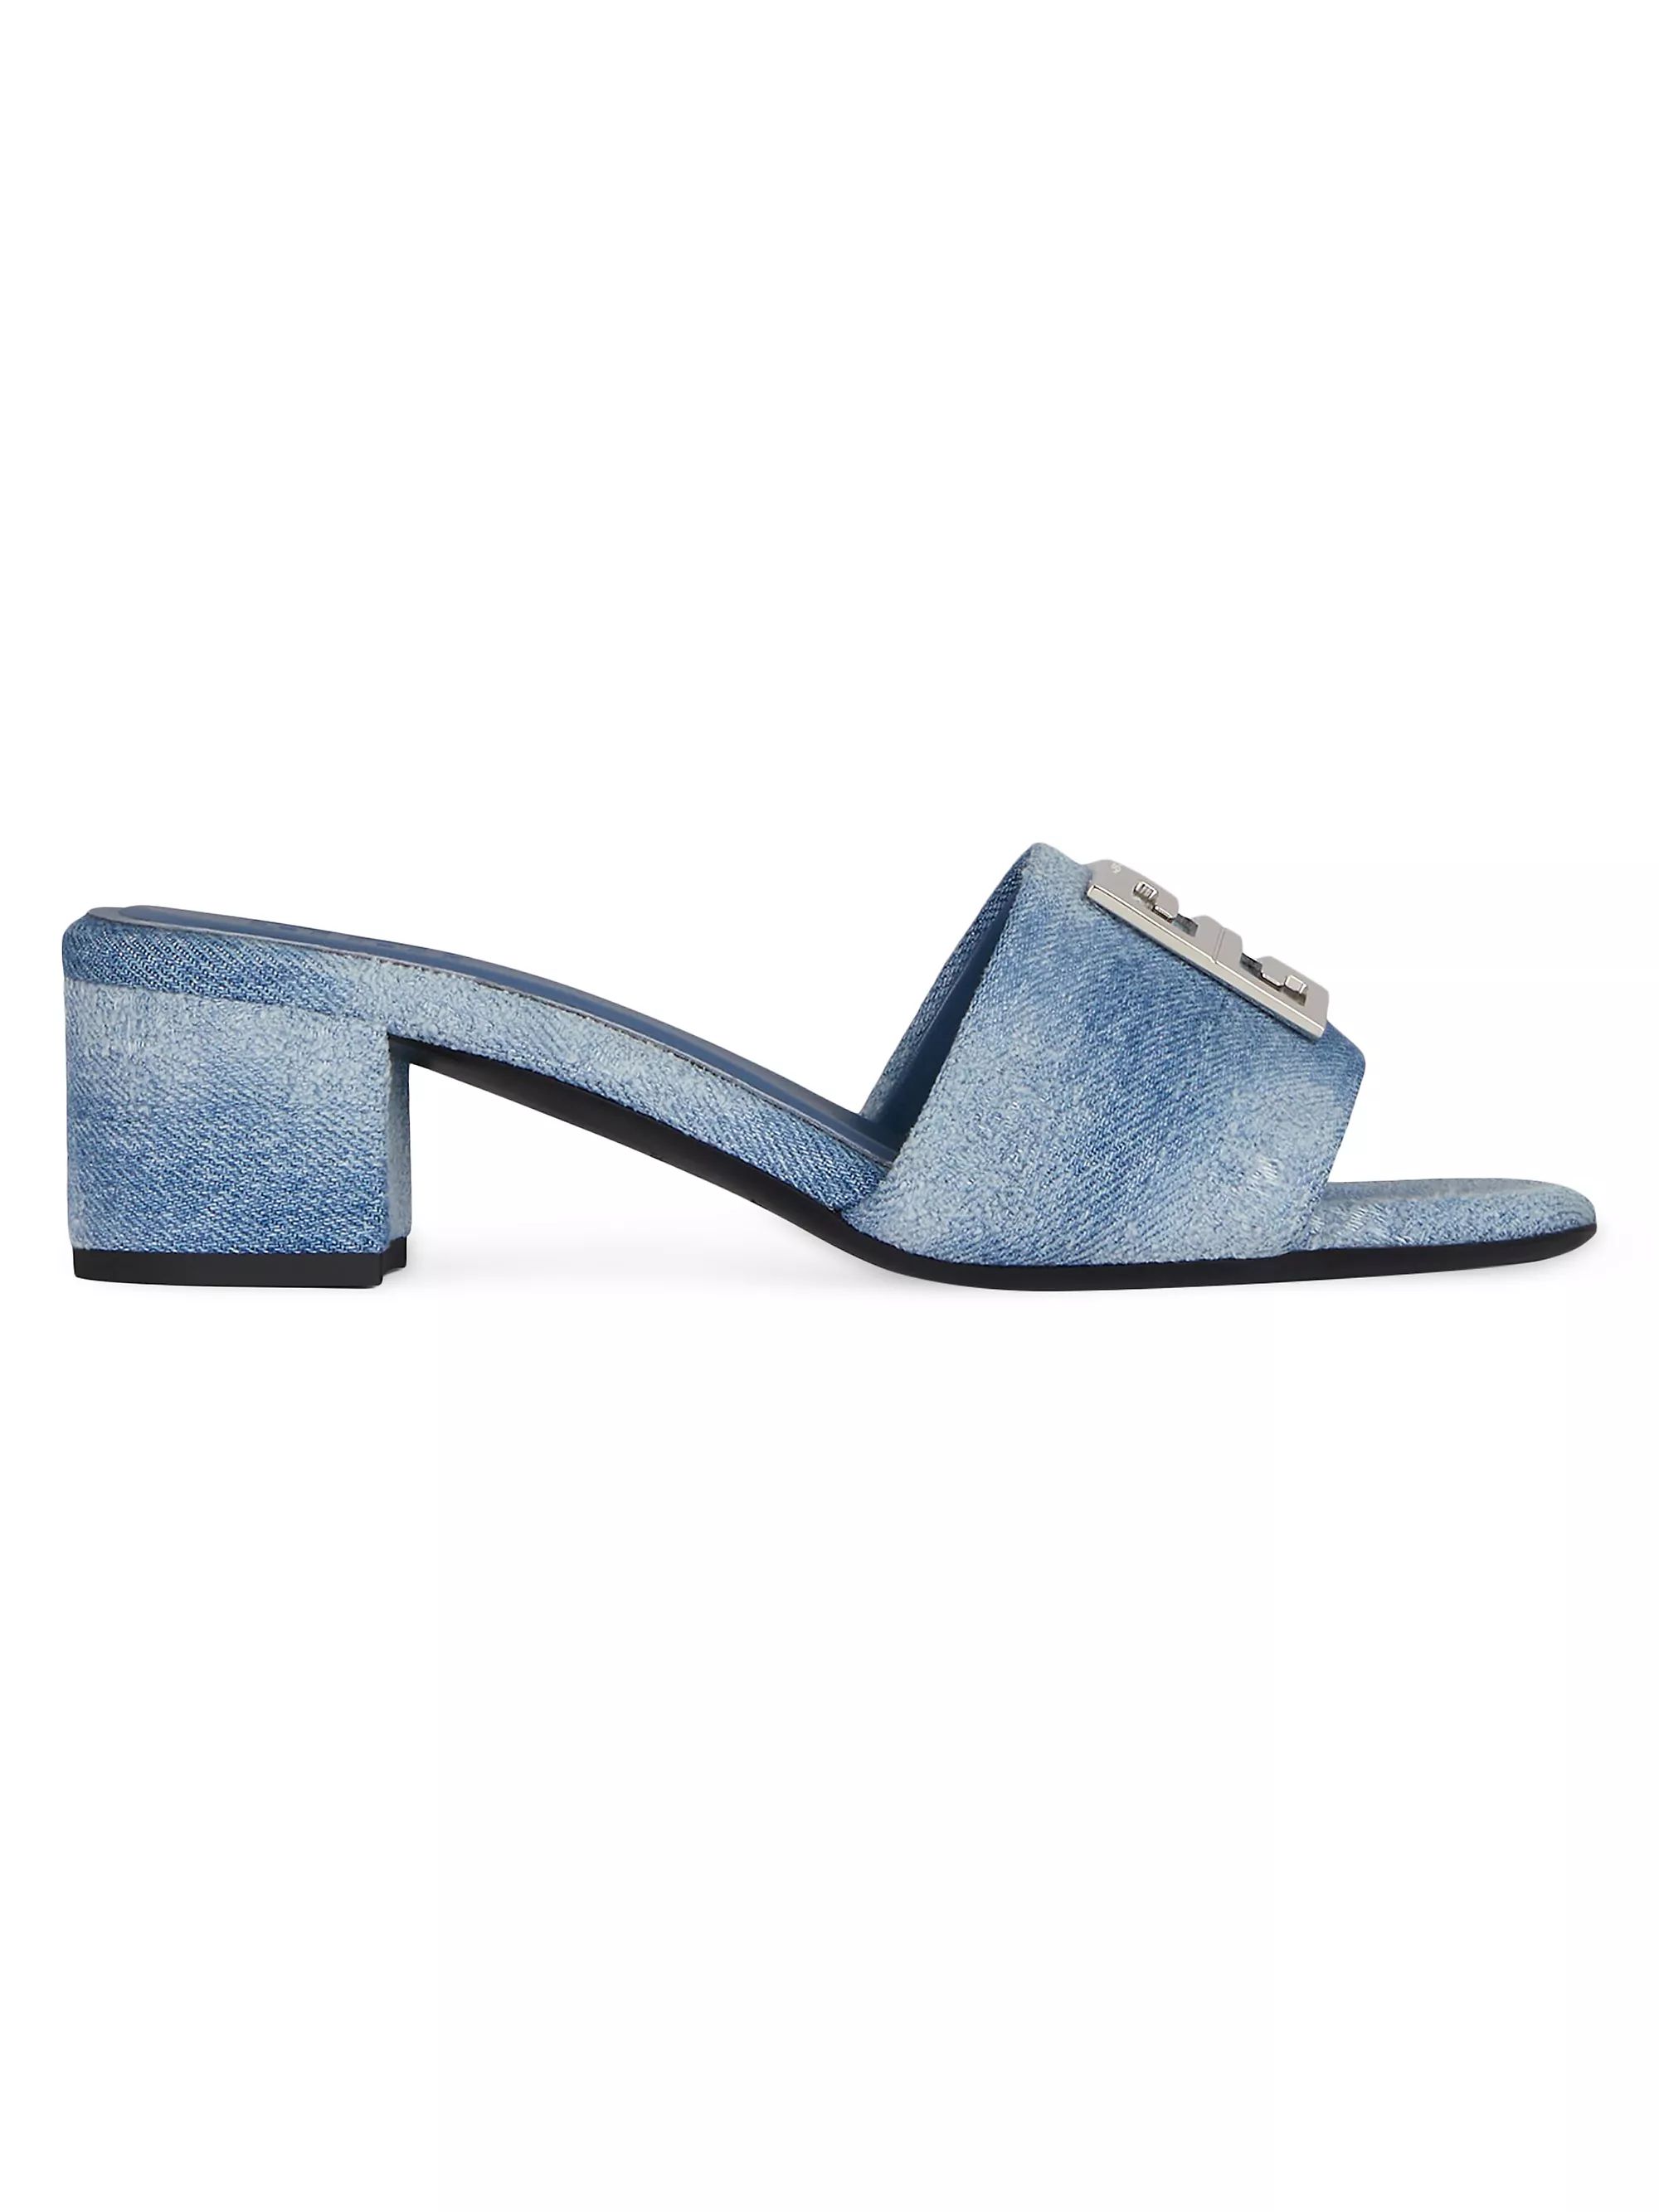 4G Mules in Washed Denim | Saks Fifth Avenue